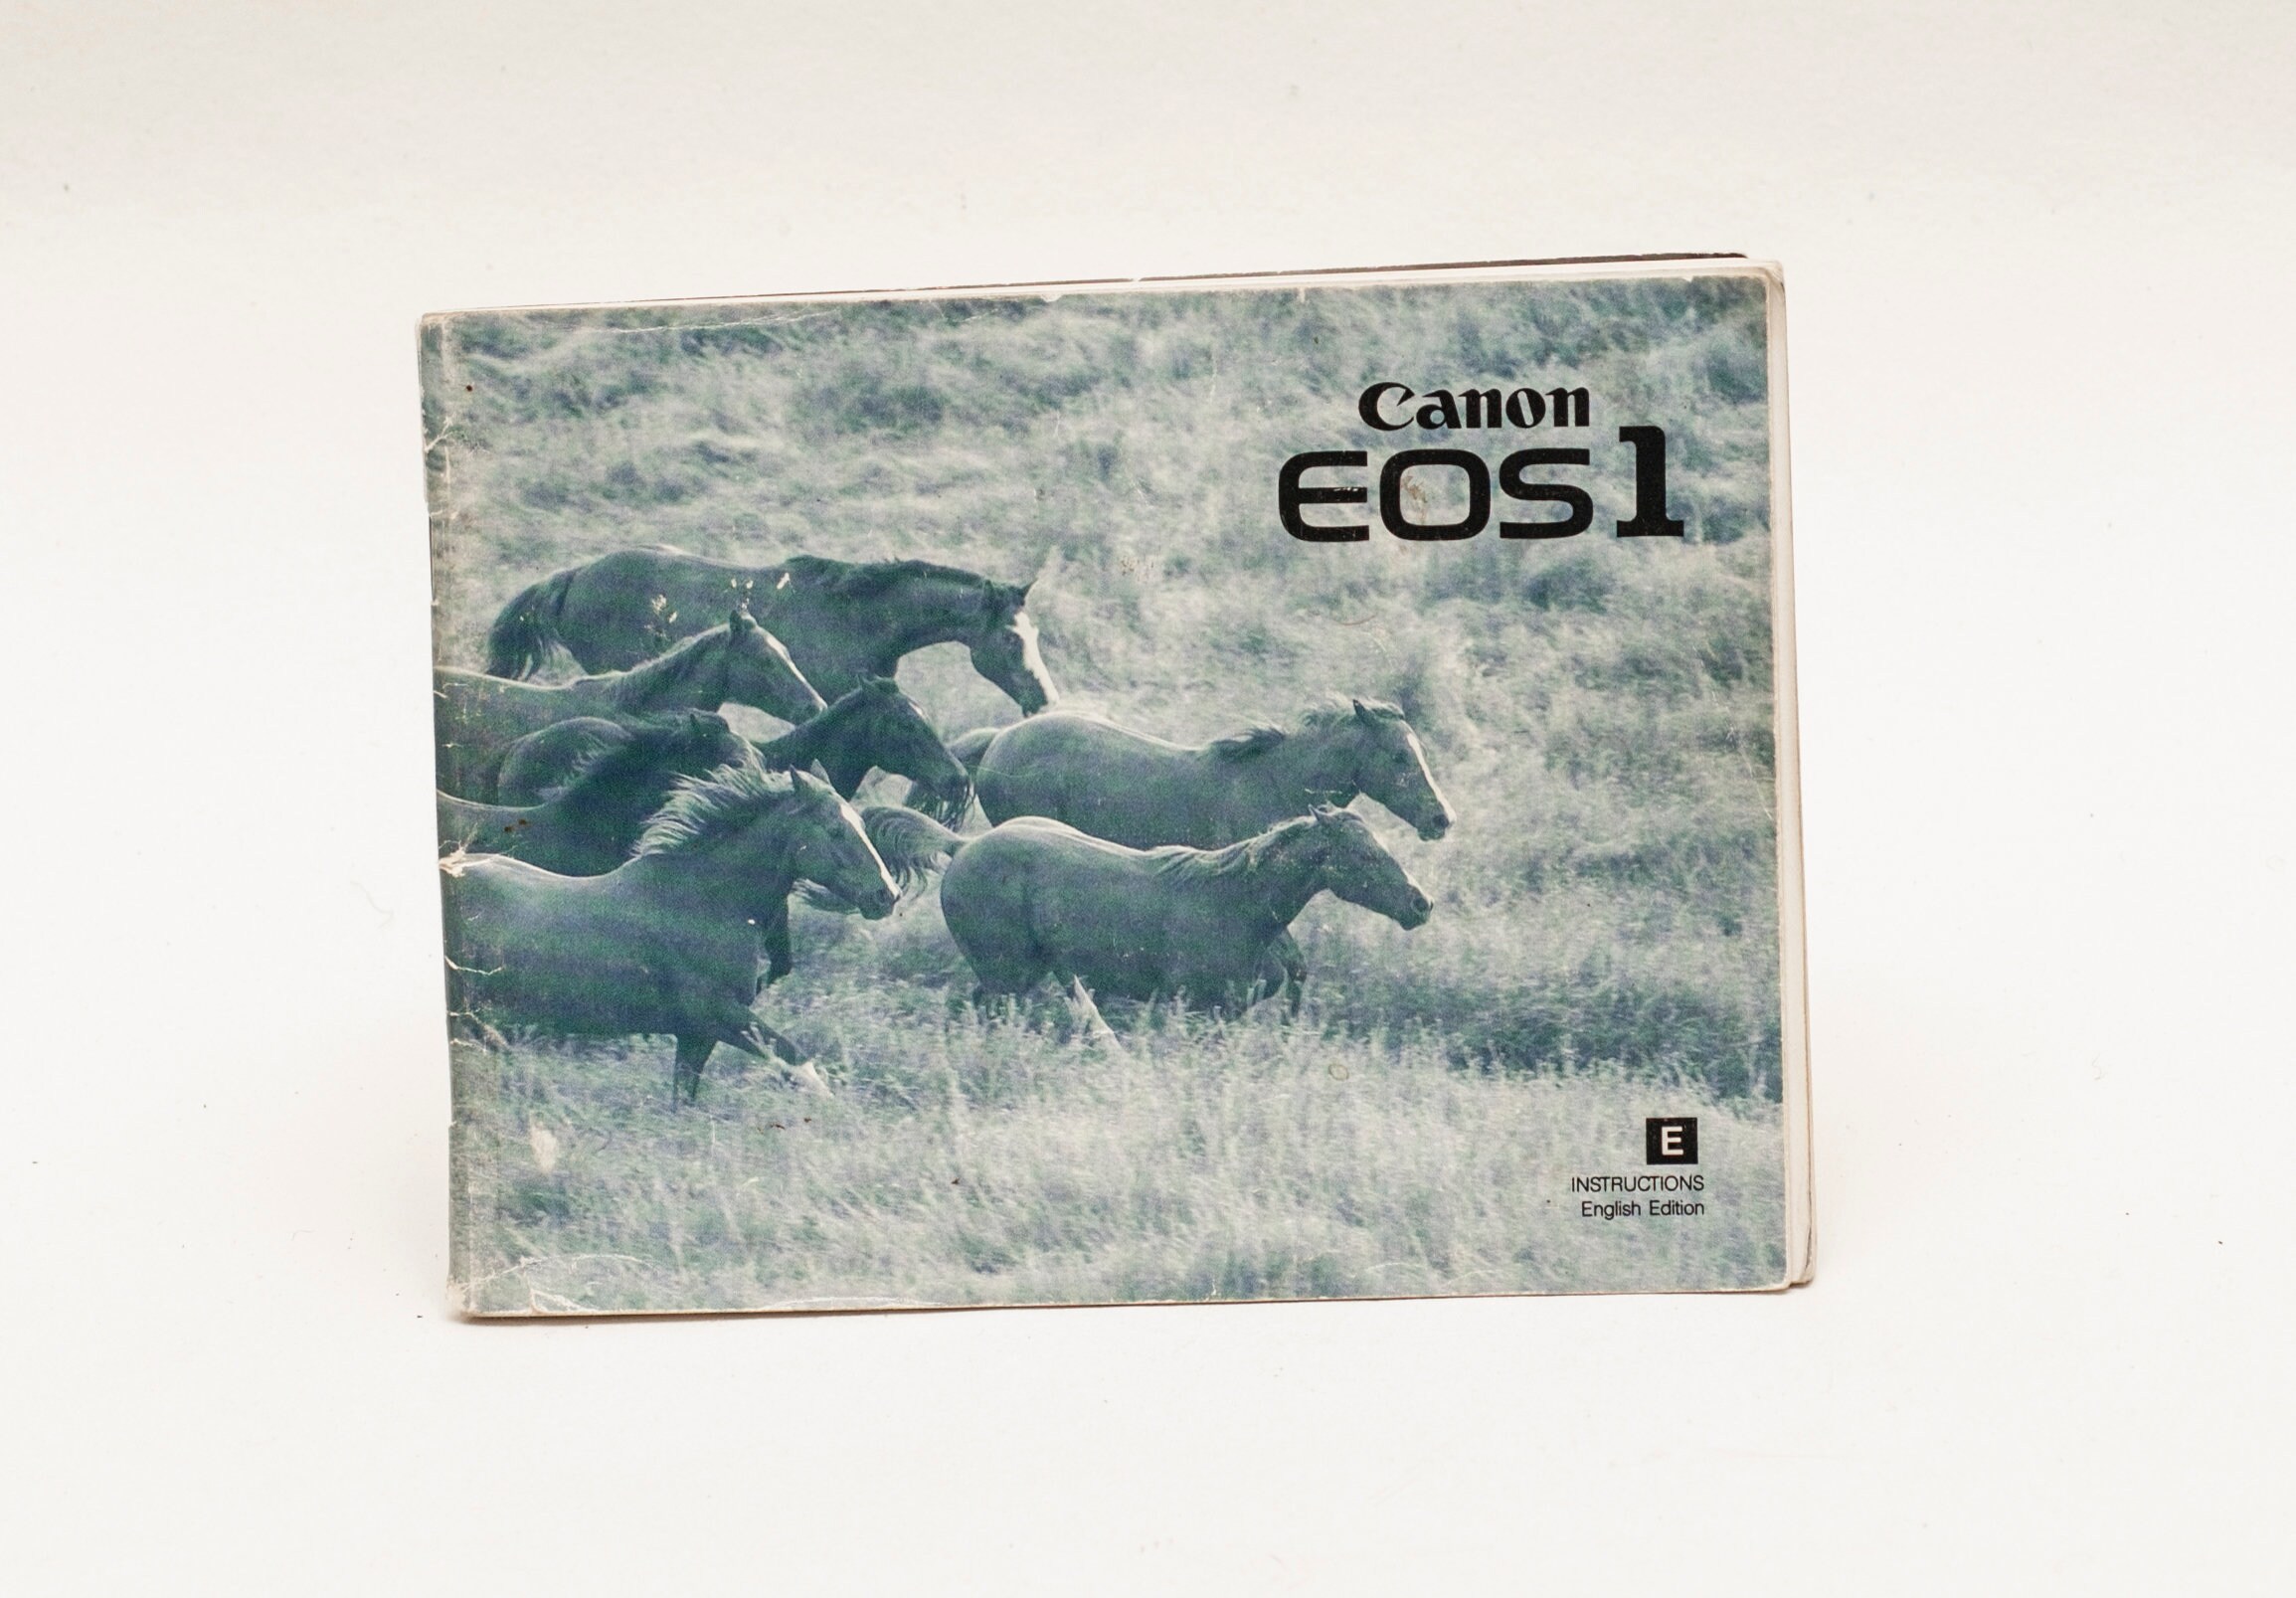 OEM Canon EOS 1 35mm SLR Camera Instruction Owner's Manual Guide Book 1989 EOS-1 